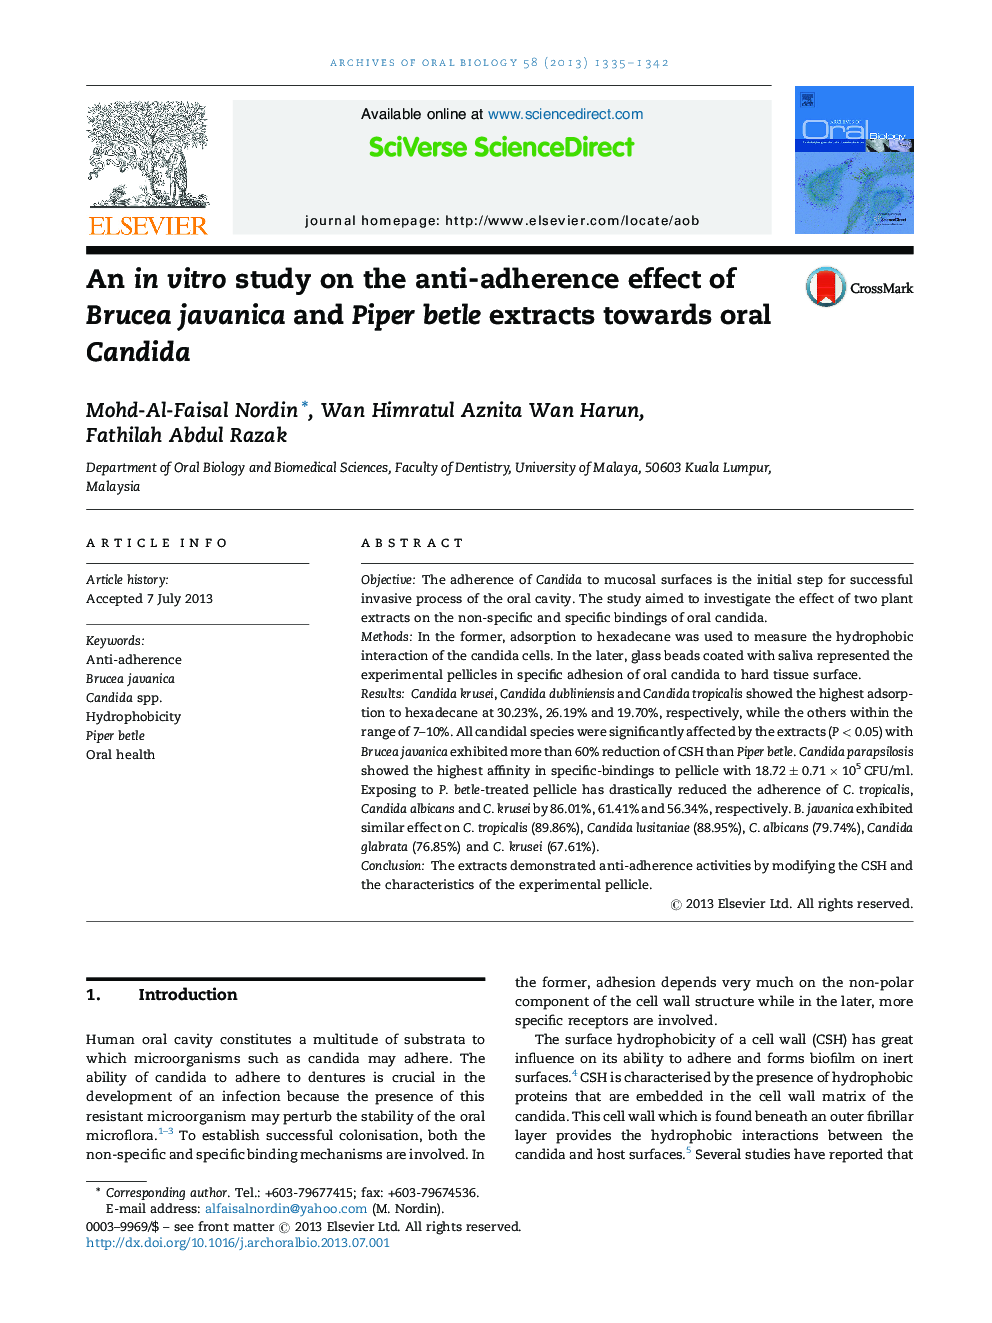 An in vitro study on the anti-adherence effect of Brucea javanica and Piper betle extracts towards oral Candida